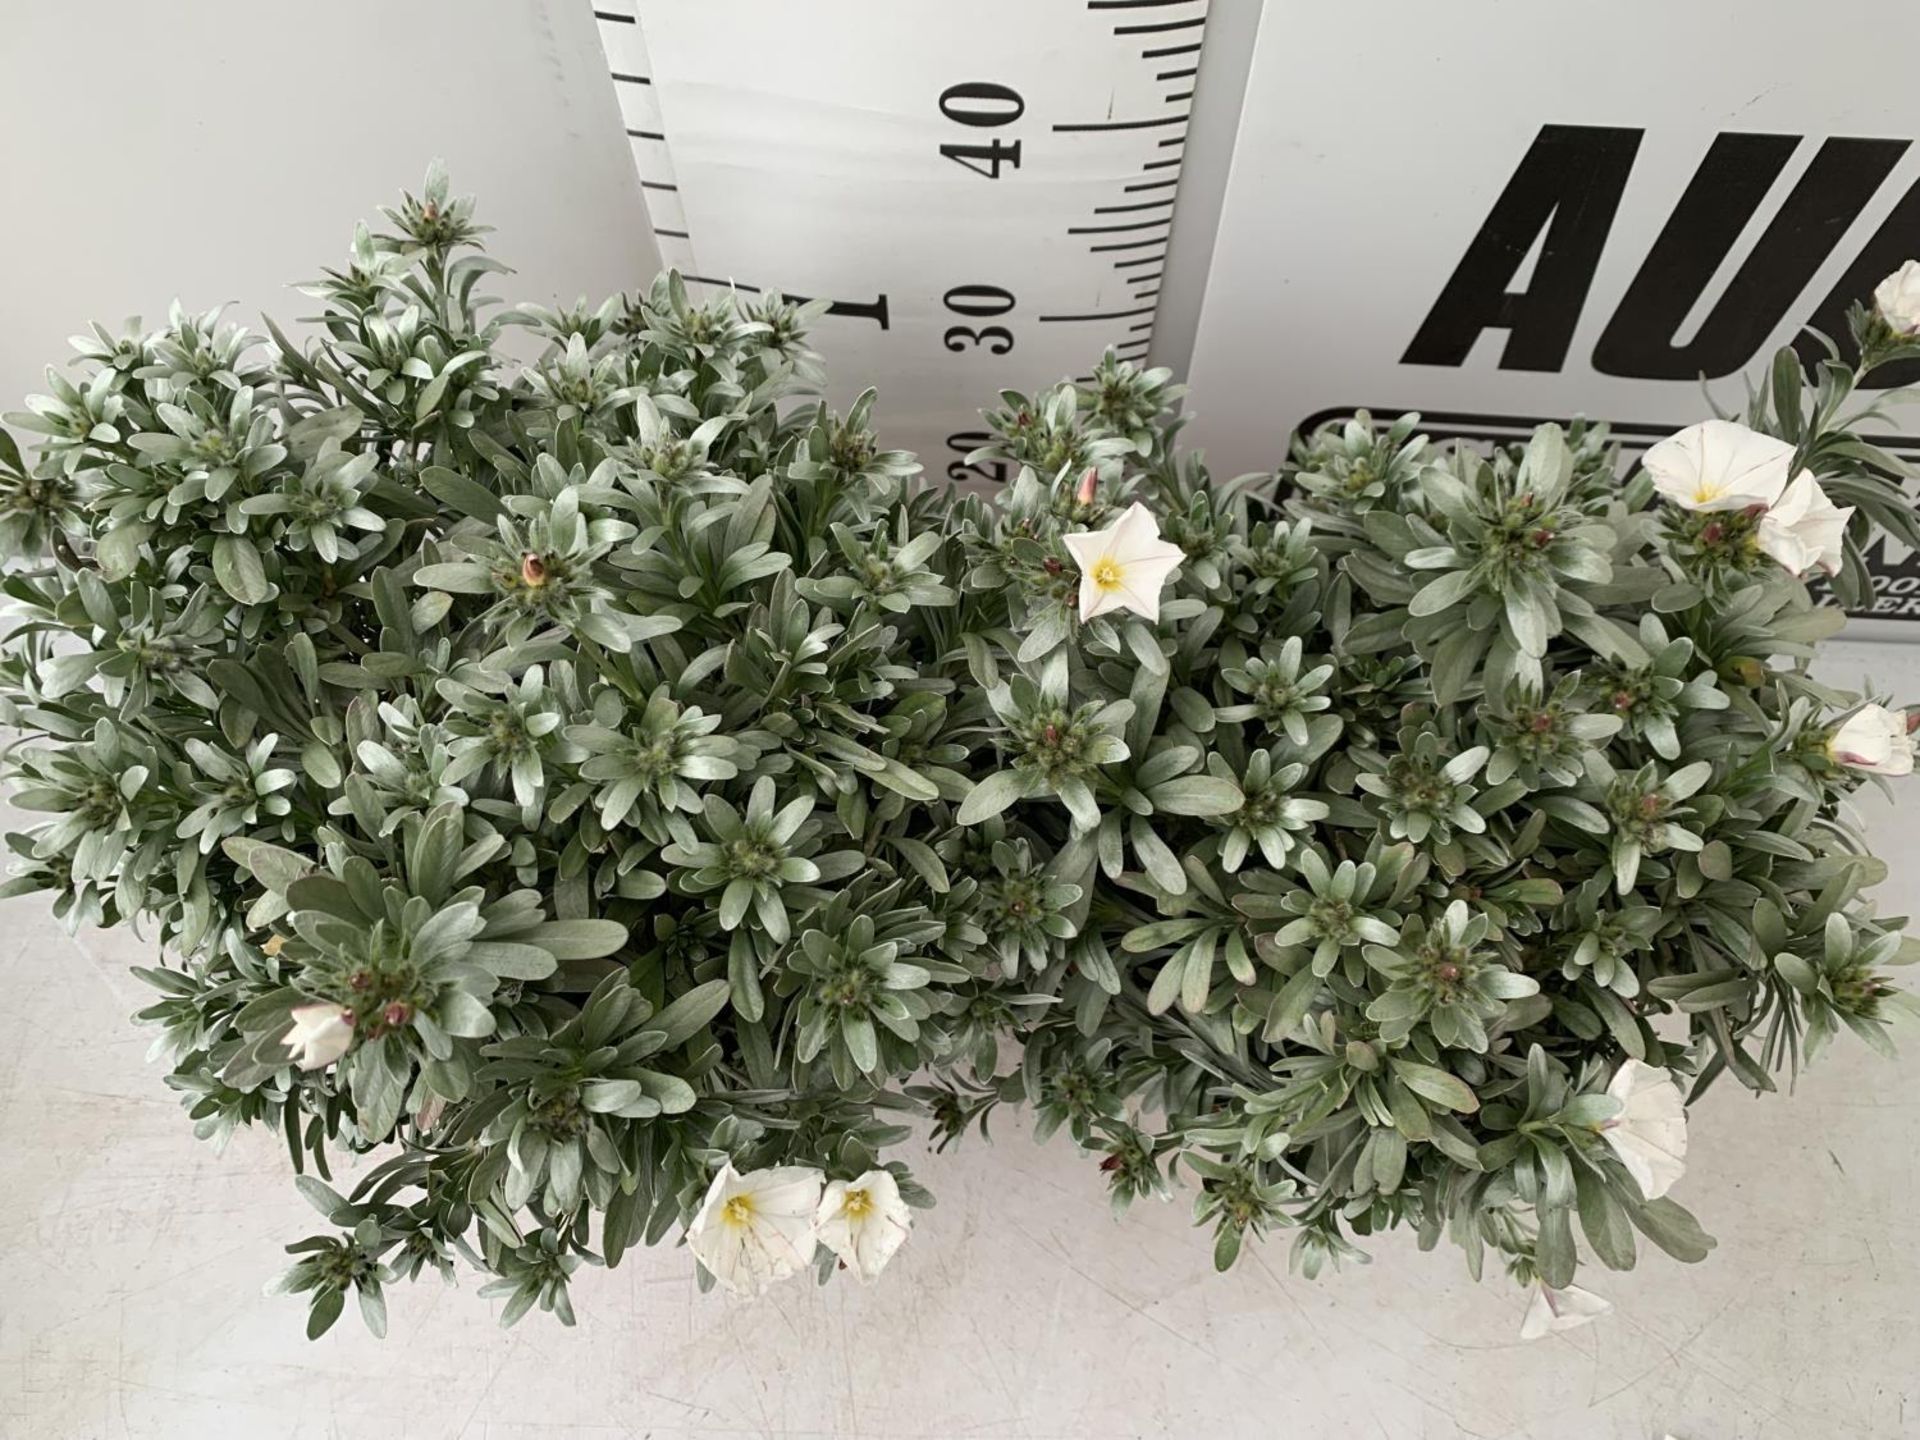 TWO CONVOLVULUS CNEORUM WITH WHITE FLOWERS IN 5 LTR POTS APPROX 45CM IN HEIGHT PLUS VAT TO BE SOLD - Image 4 of 8